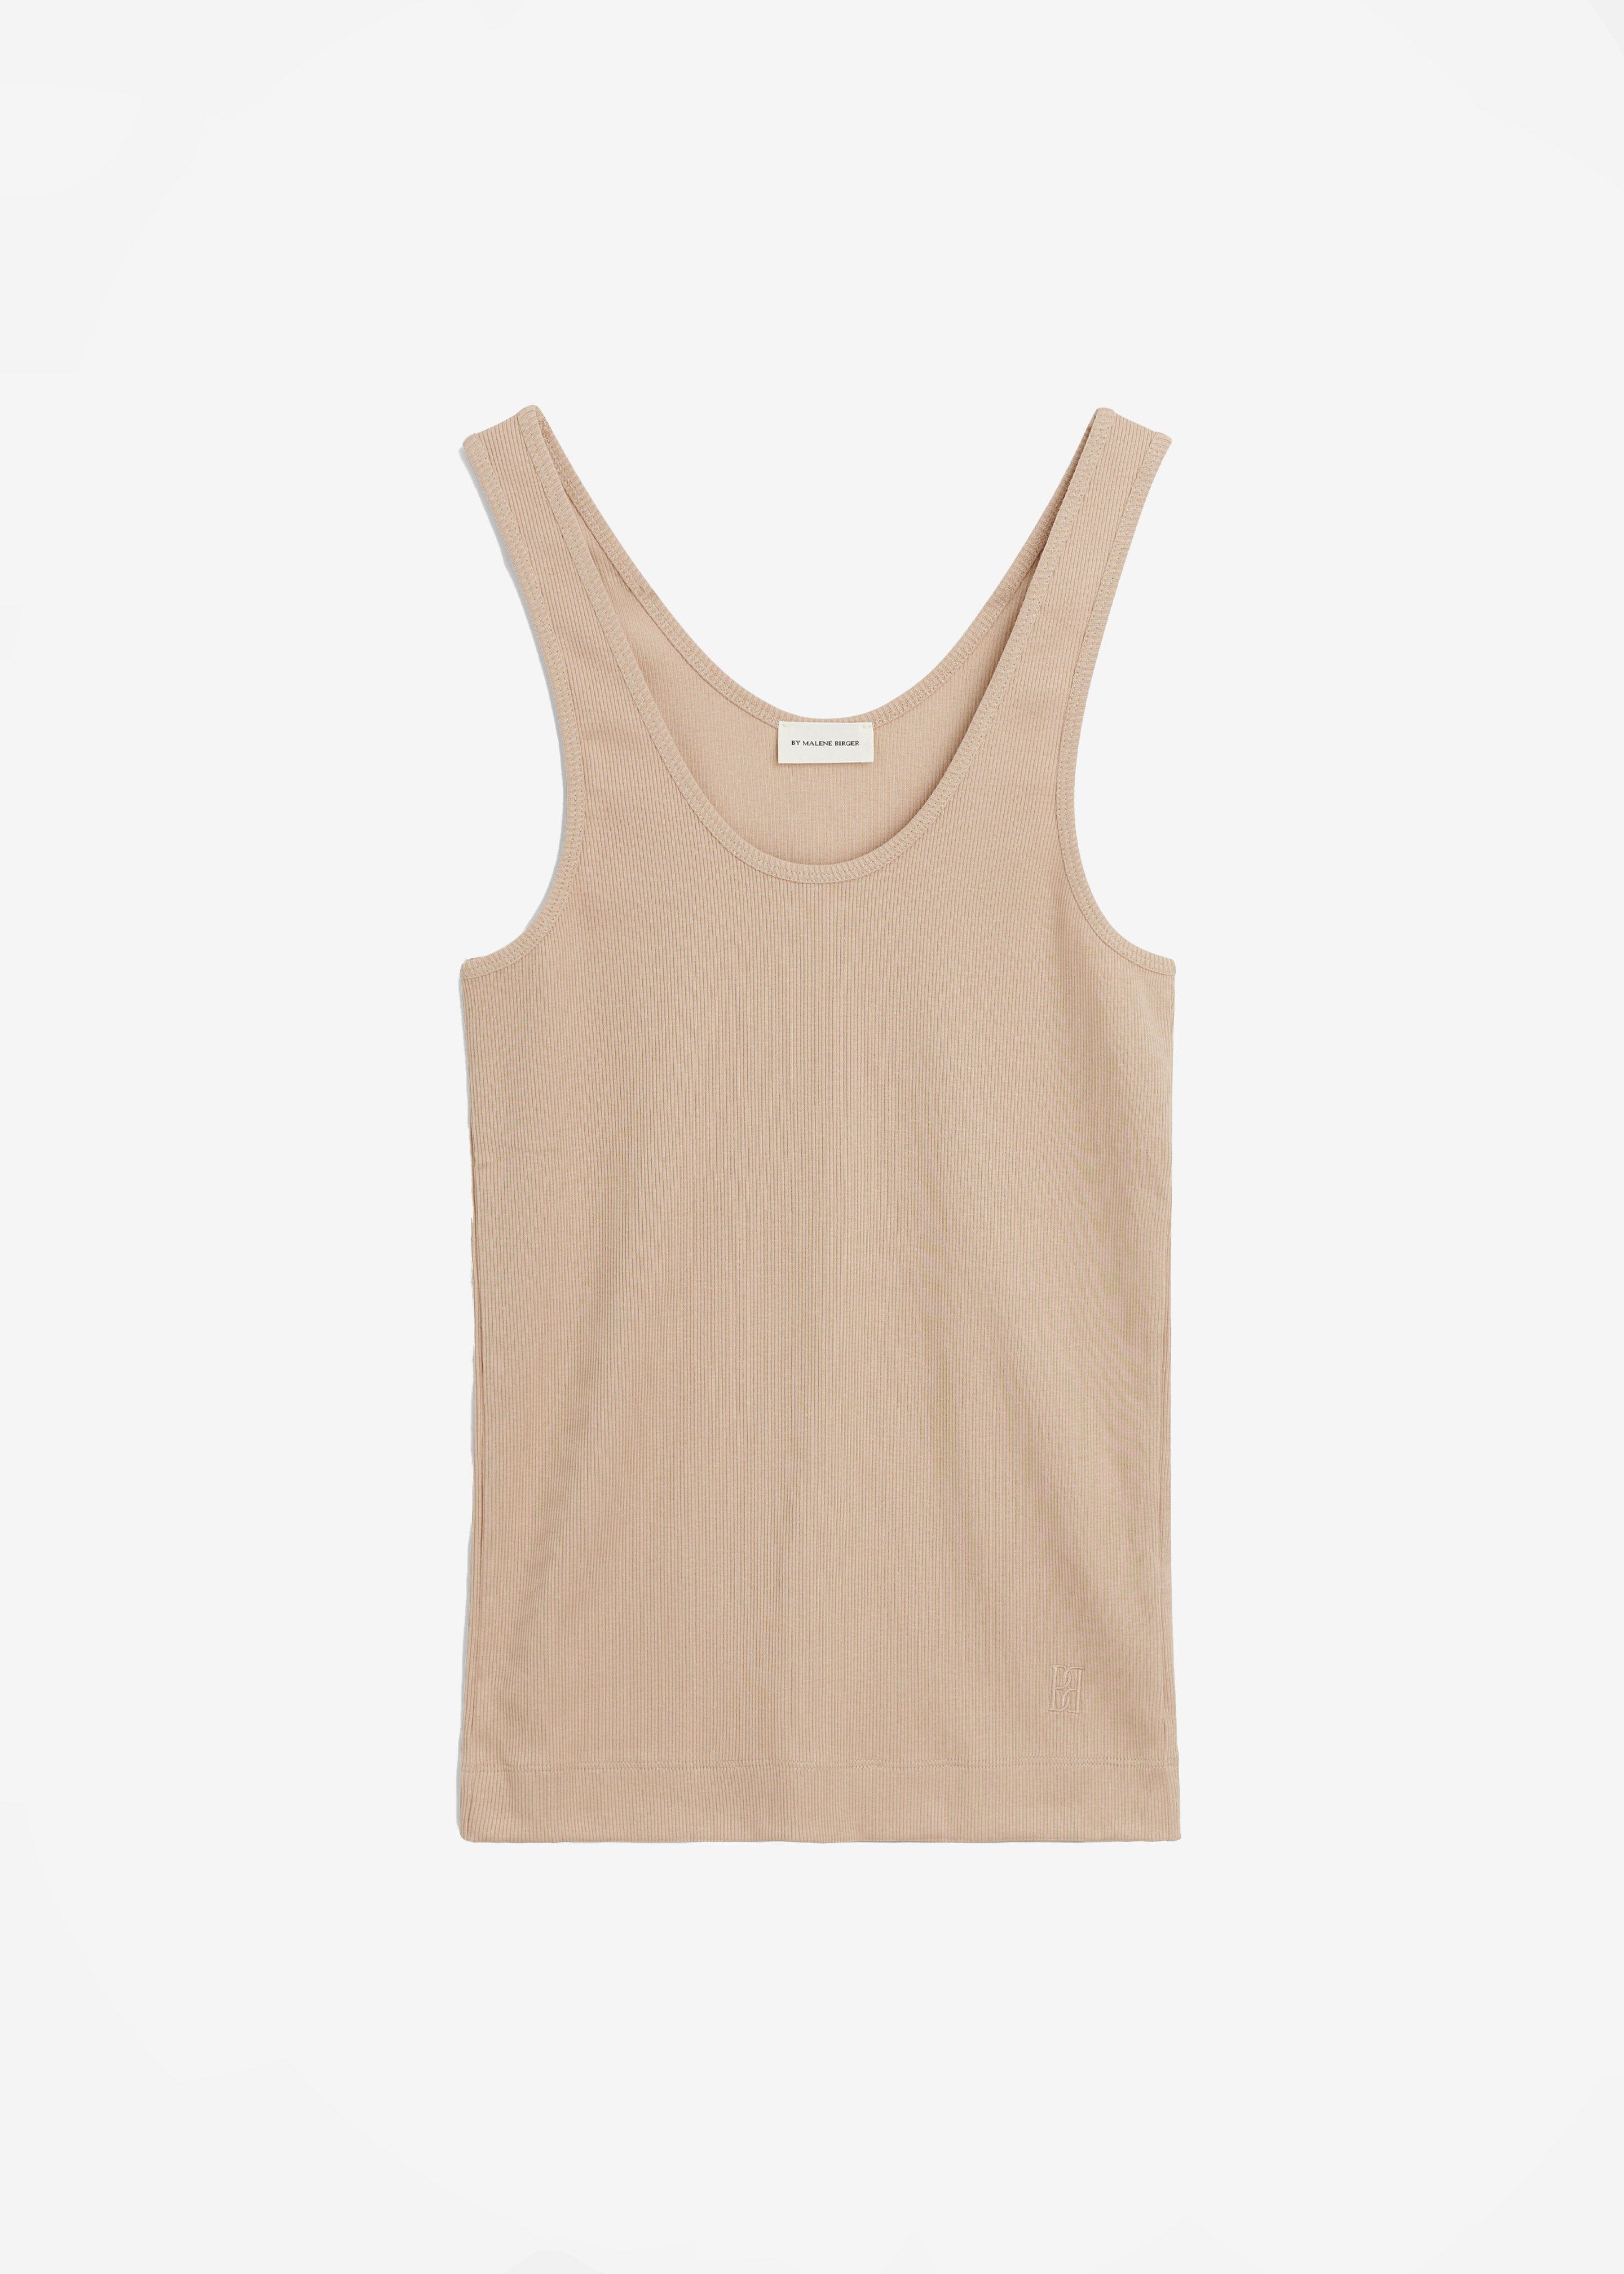 By Malene Birger Anisa Tank Top - Nomad - 6